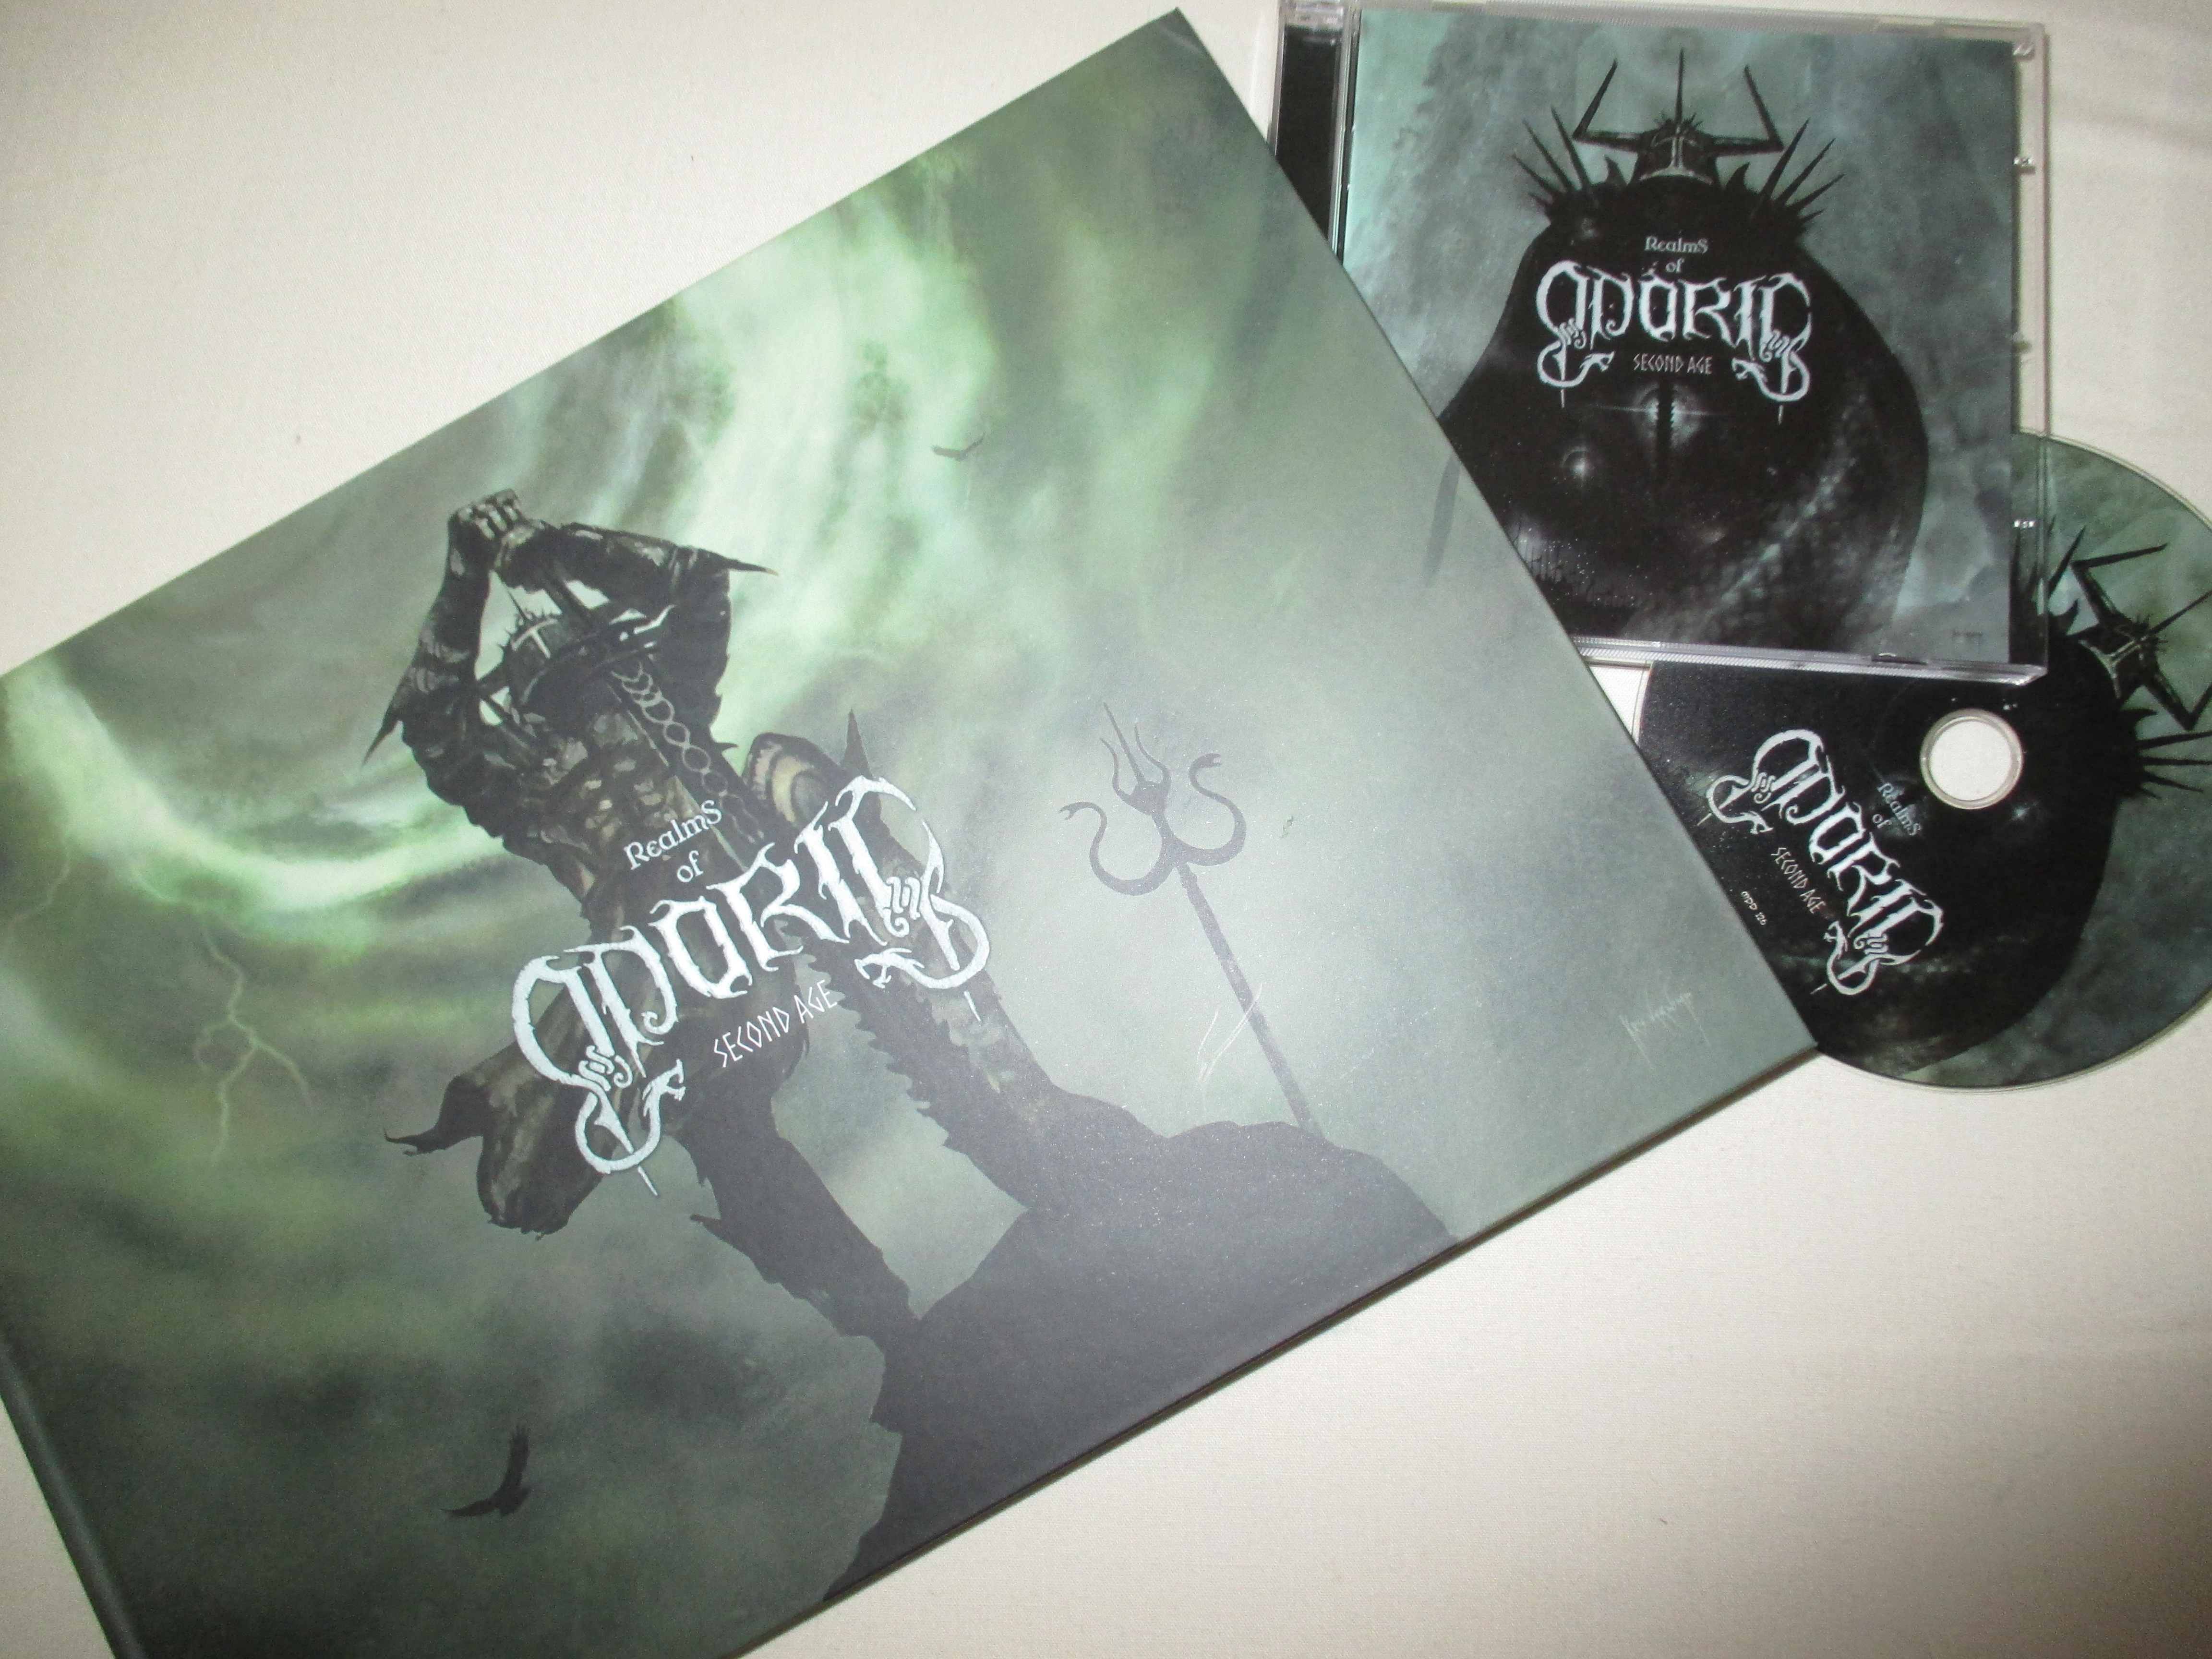 Realms Of Odoric - "Second Age" Full Version CD + BOOK Edition